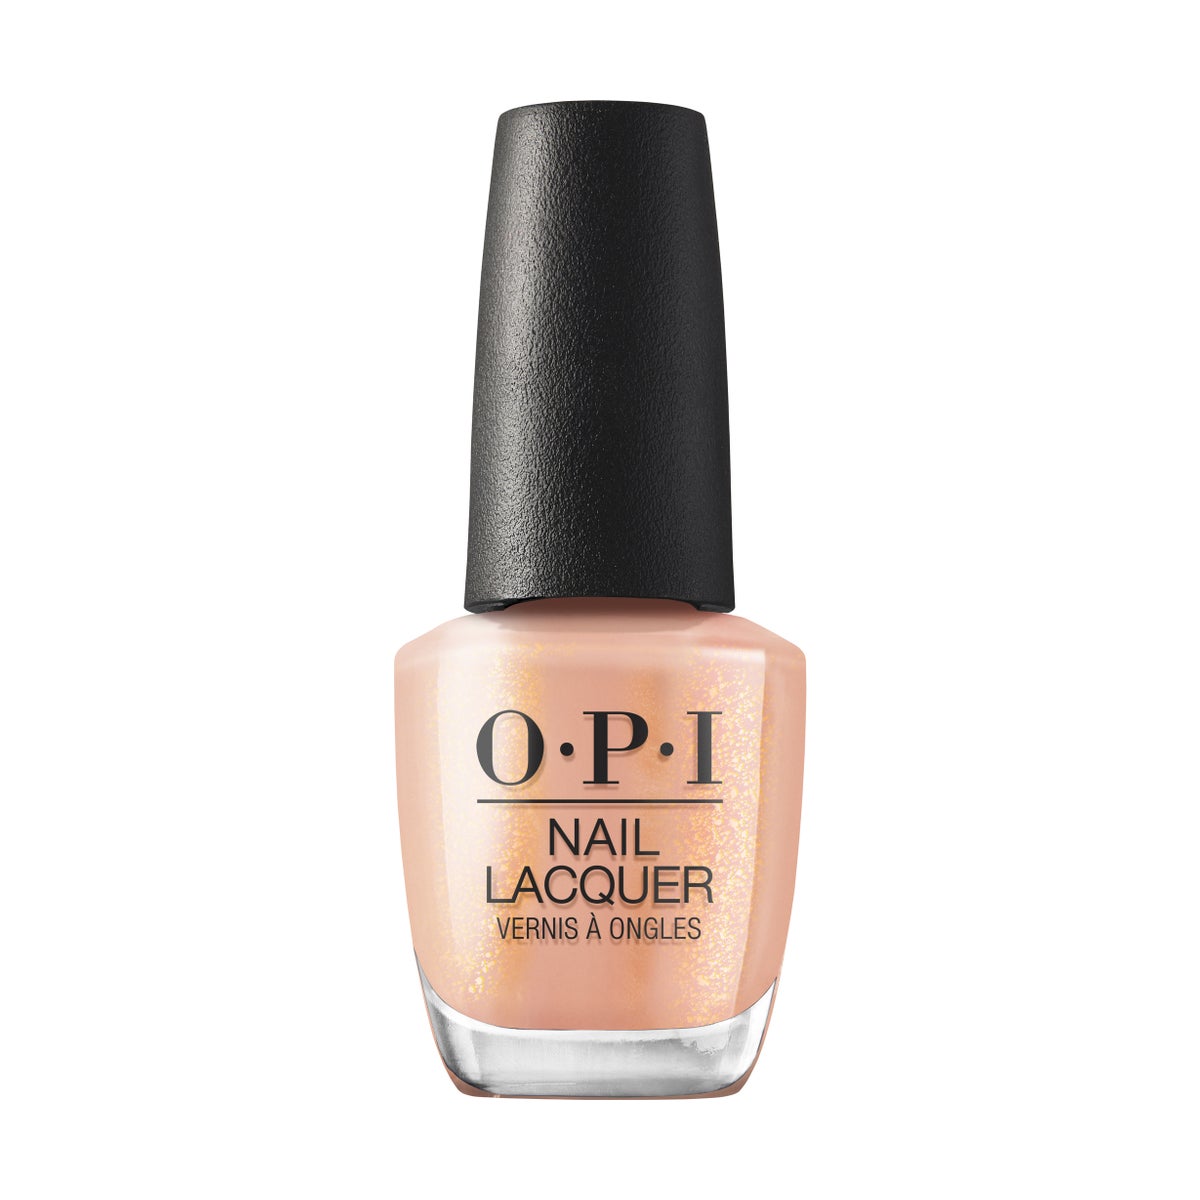 The Future Is You - OPI Nail Lacquer